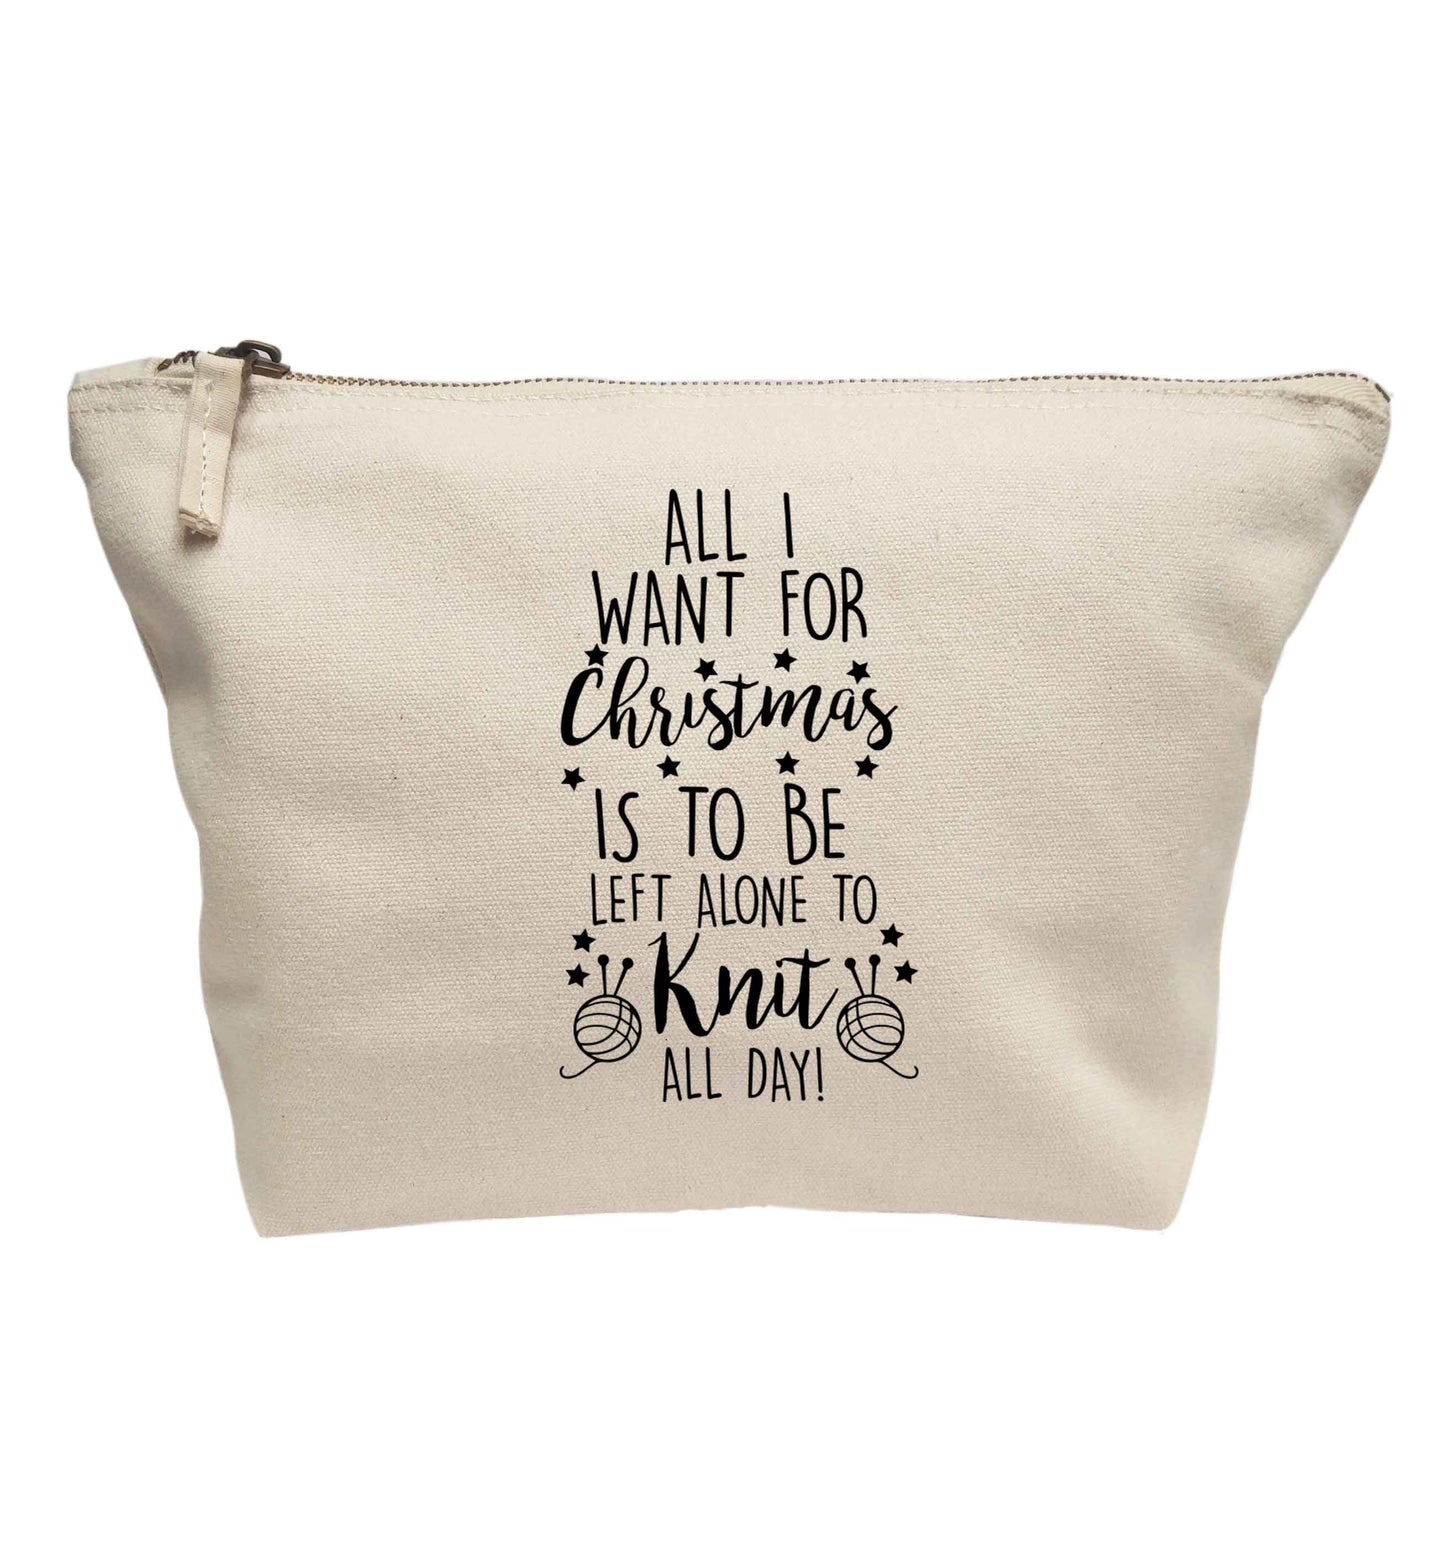 All I want for Christmas is to be left along to knit all day | Makeup / wash bag